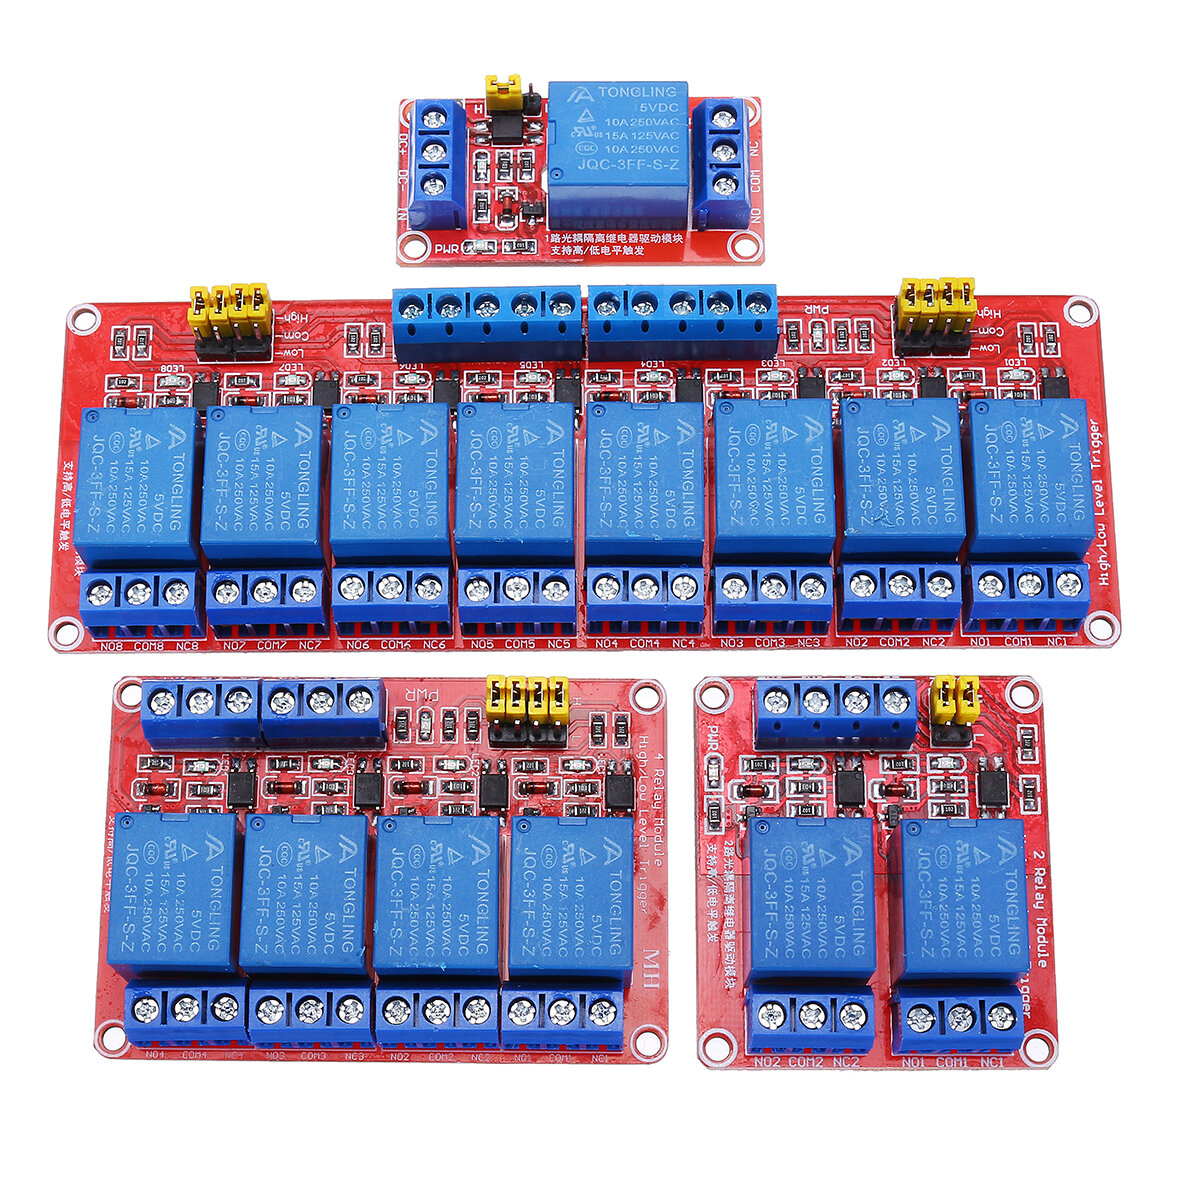 5V 1 / 2 / 4 / 8 Channel Relay High Low Level Optocoupler Module ForPI